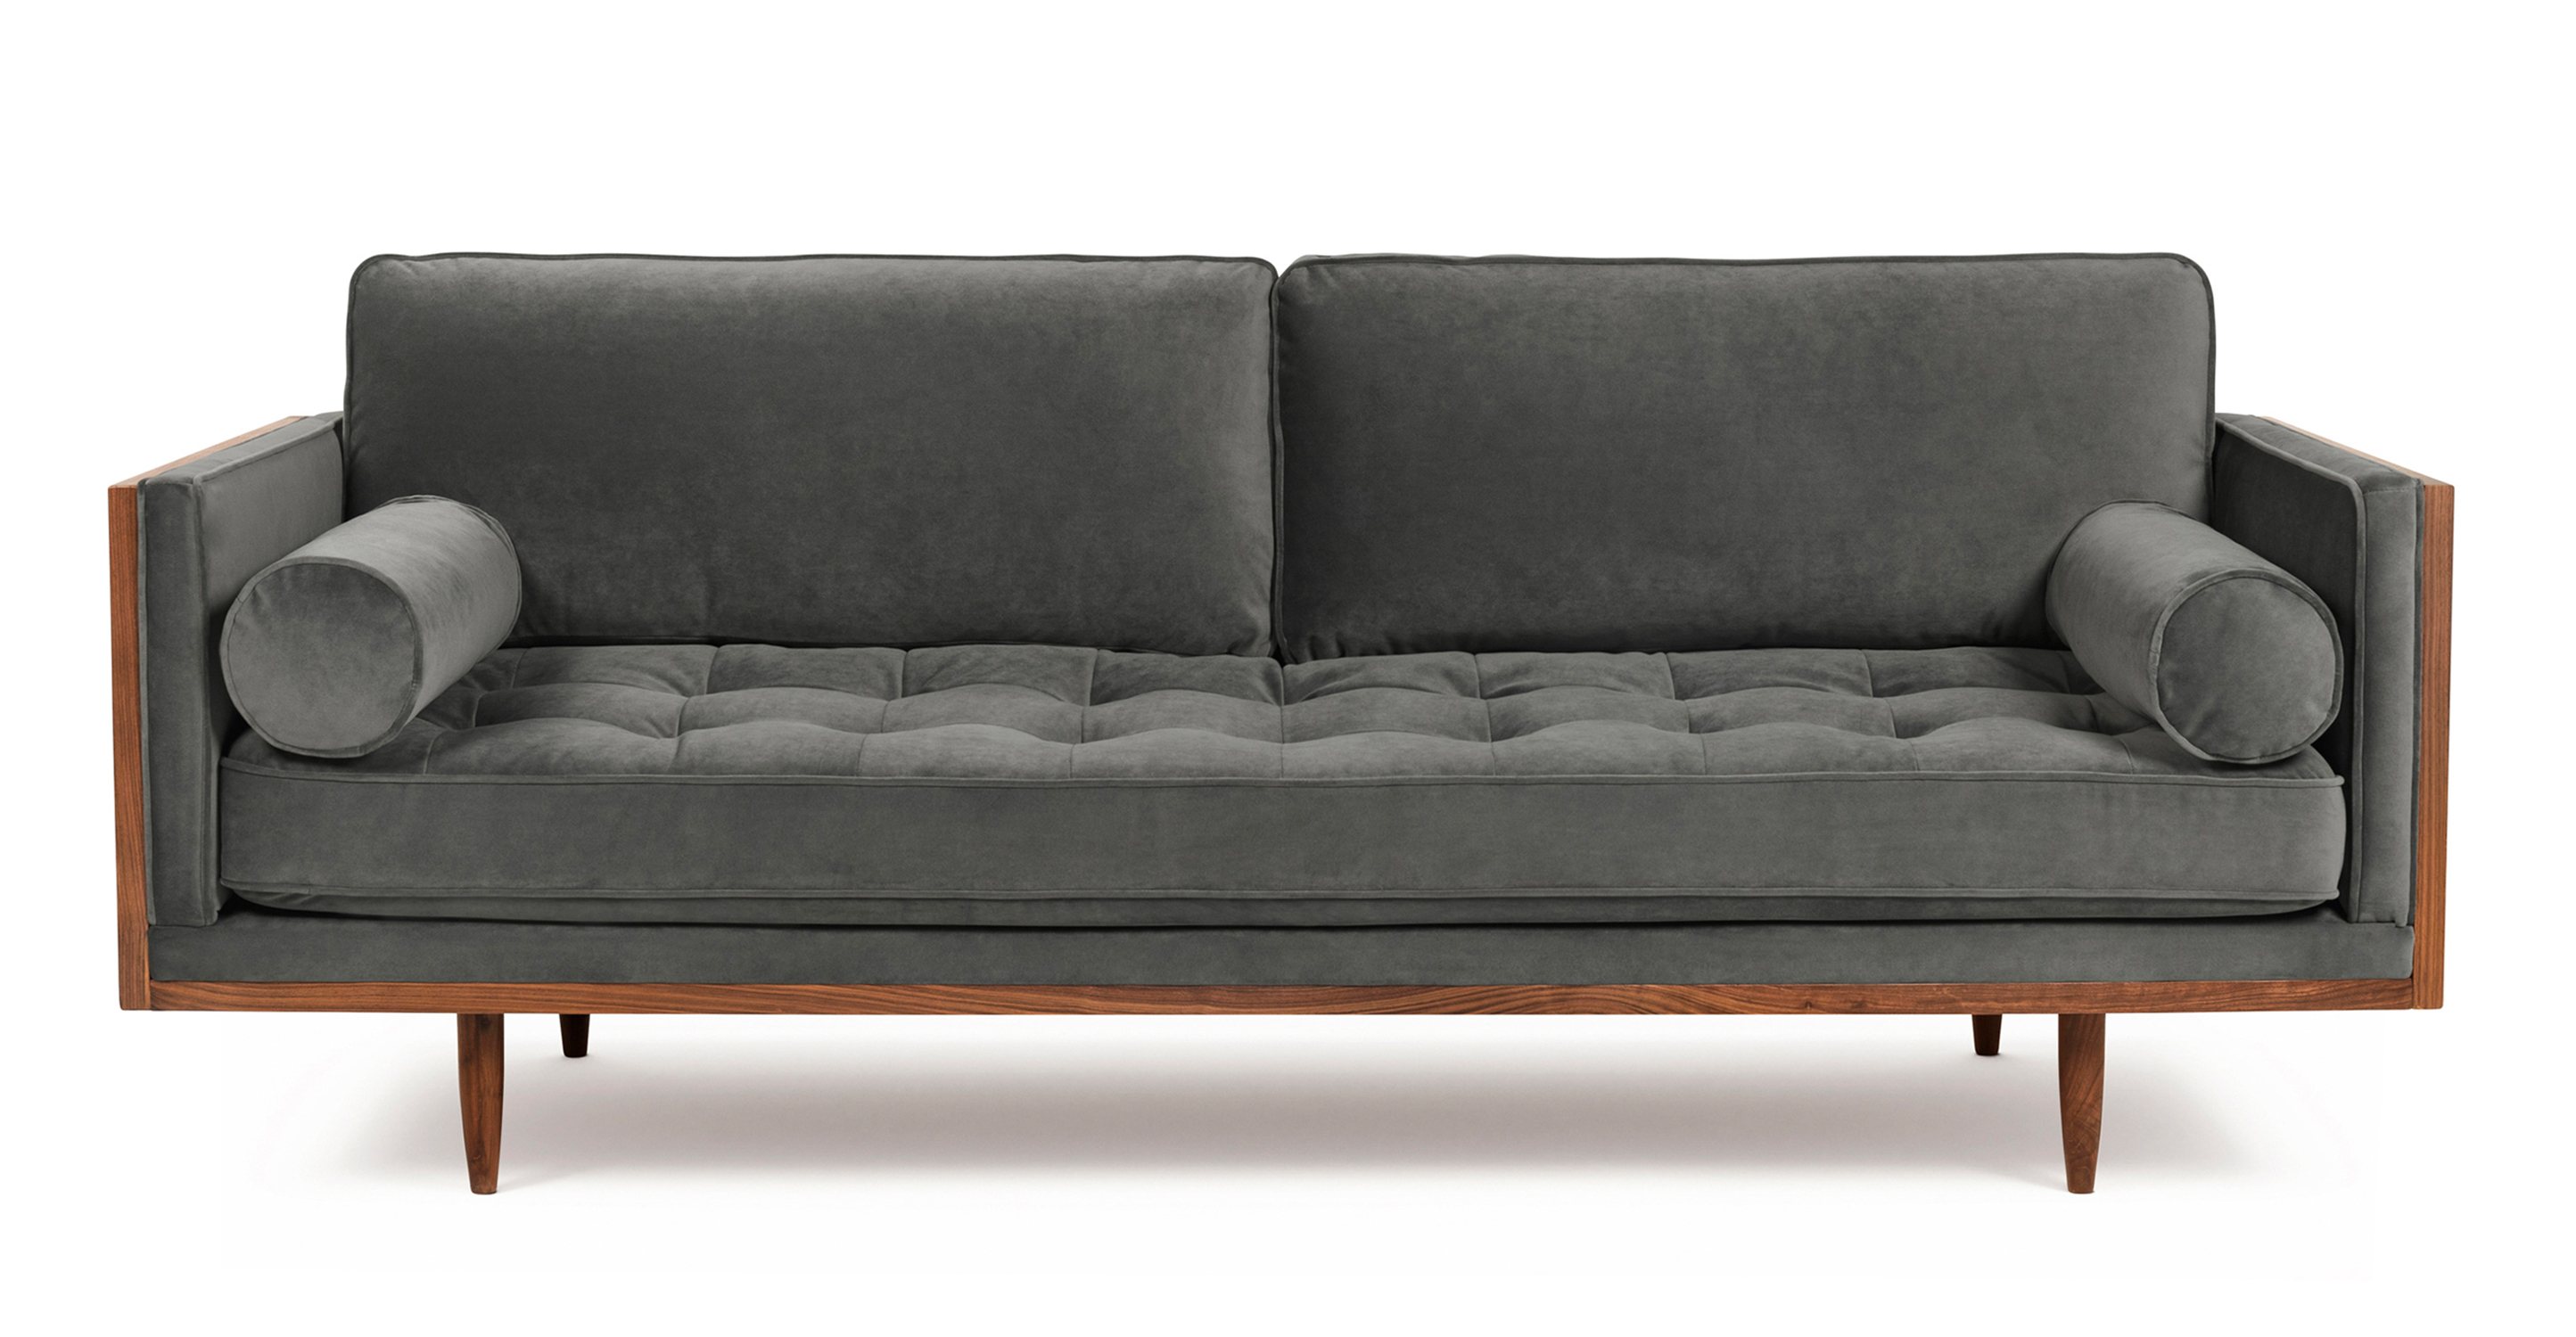 Woodrow Skandi 3 Seat Sofa in Pepper Velvet has two cylindrical bolster pillows. The sofa has one large removable seat cushion with buttonless tufting, two large removable back cushions without tufting. Sofa's frame and legs are walnut colored. The back and outsides of the sofa are wooden. The fabric color is grey.  